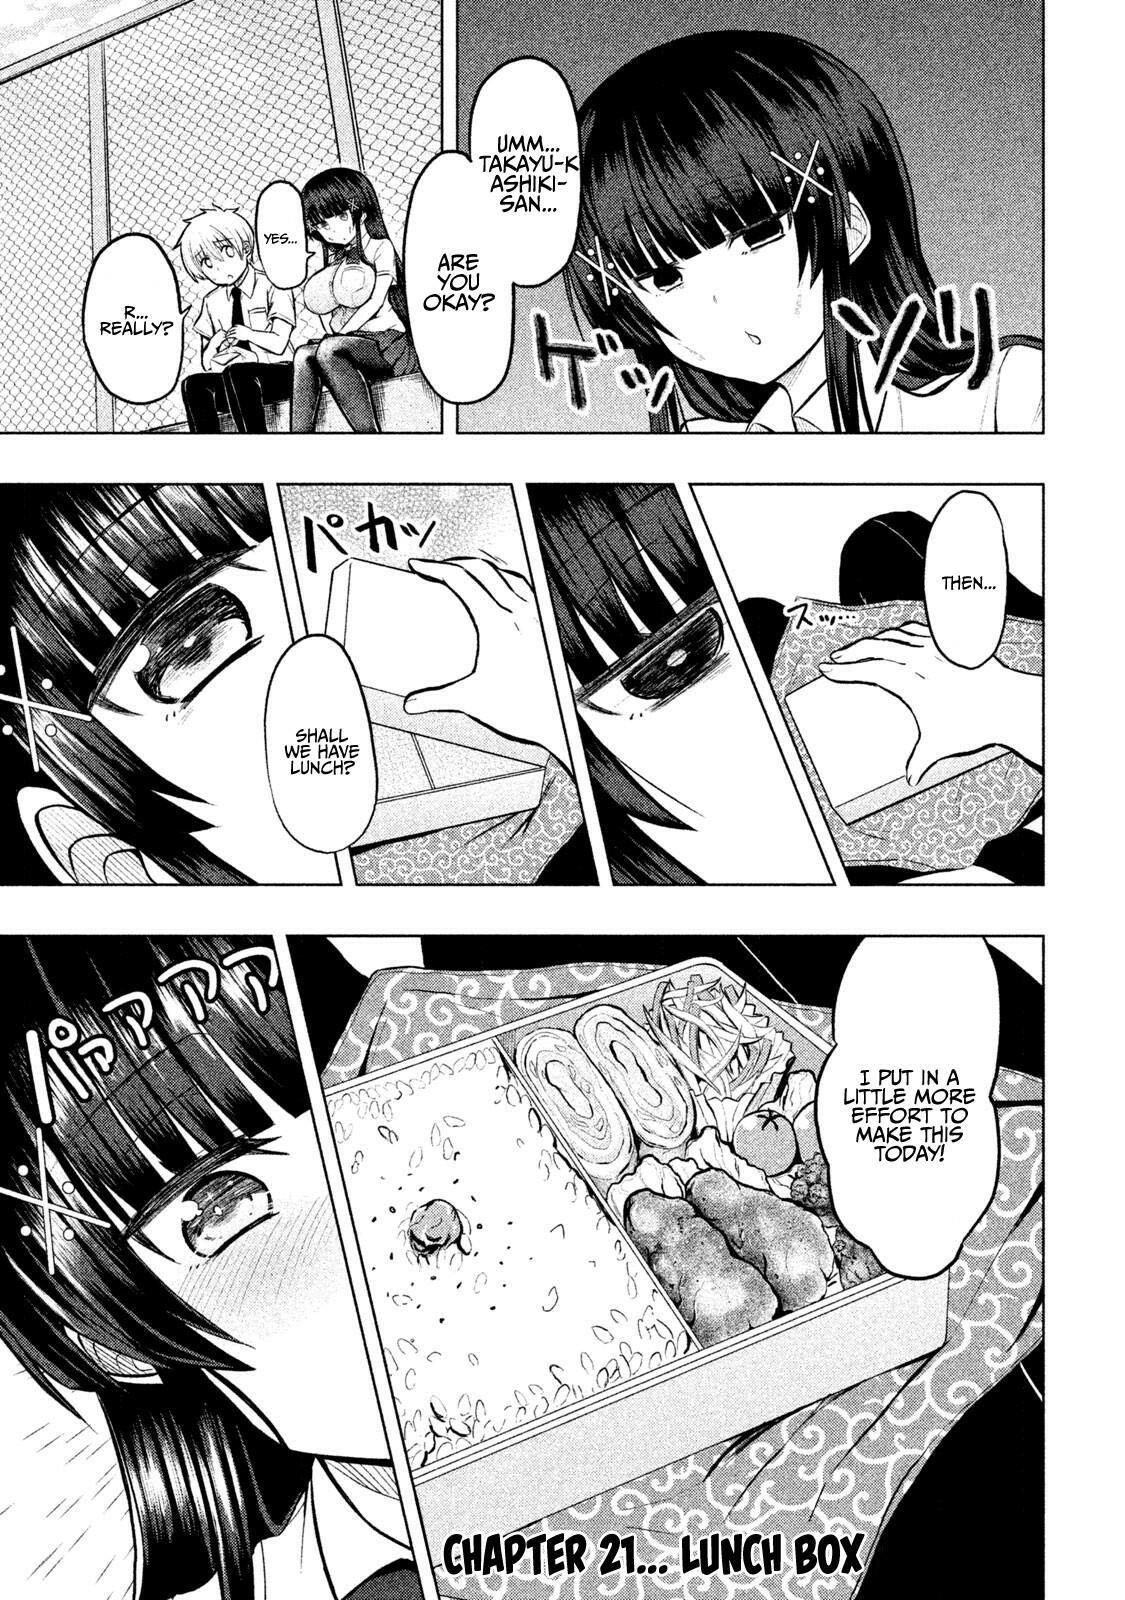 A Girl Who Is Very Well-Informed About Weird Knowledge, Takayukashiki Souko-San Chapter 21: Lunch Box page 2 - Mangakakalots.com